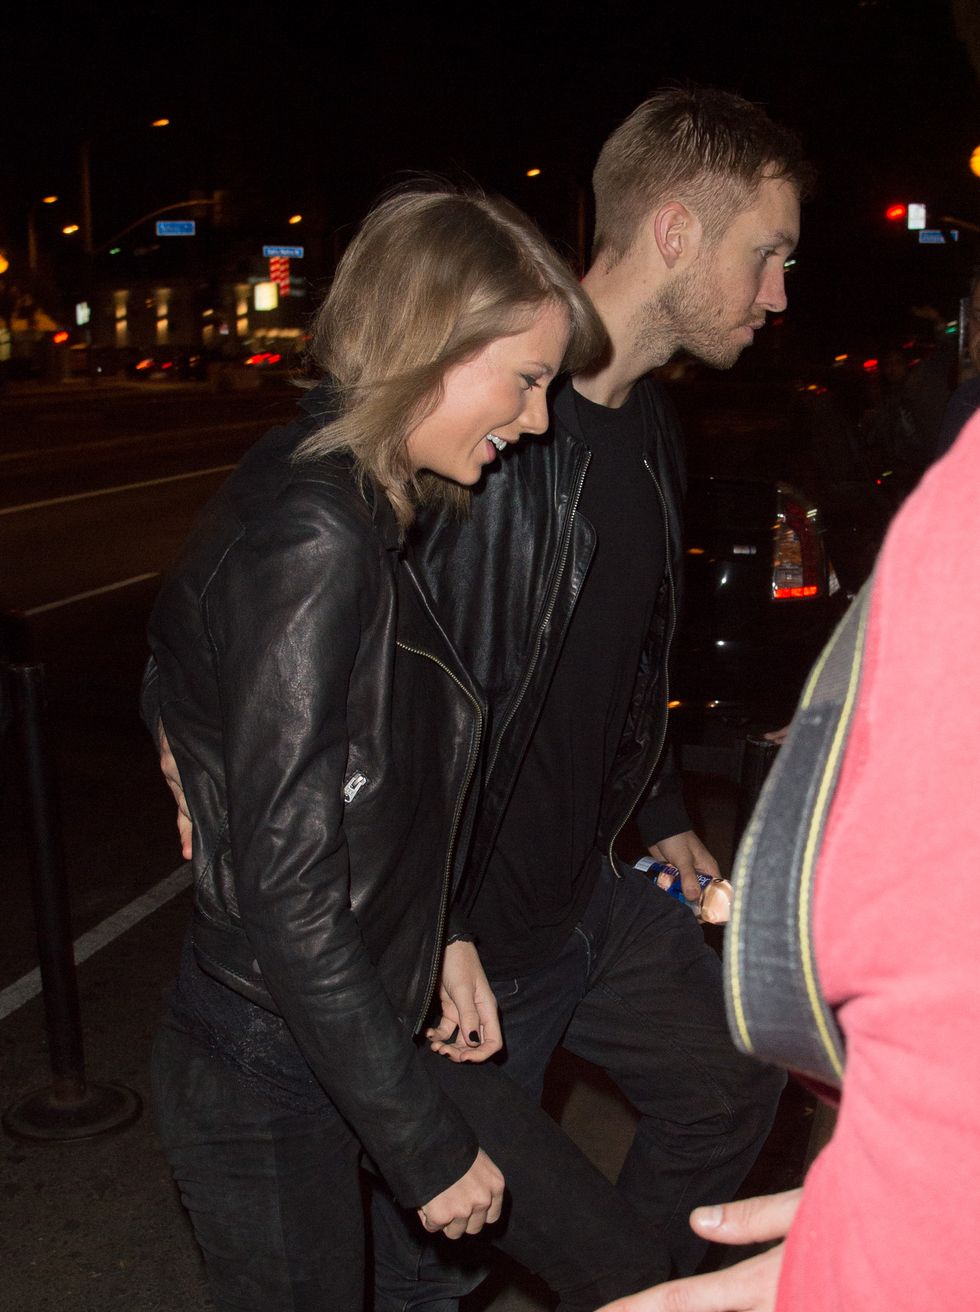 Jacket, Outerwear, Night, Interaction, Leather jacket, Leather, Midnight, Flash photography, Blond, Pocket, 